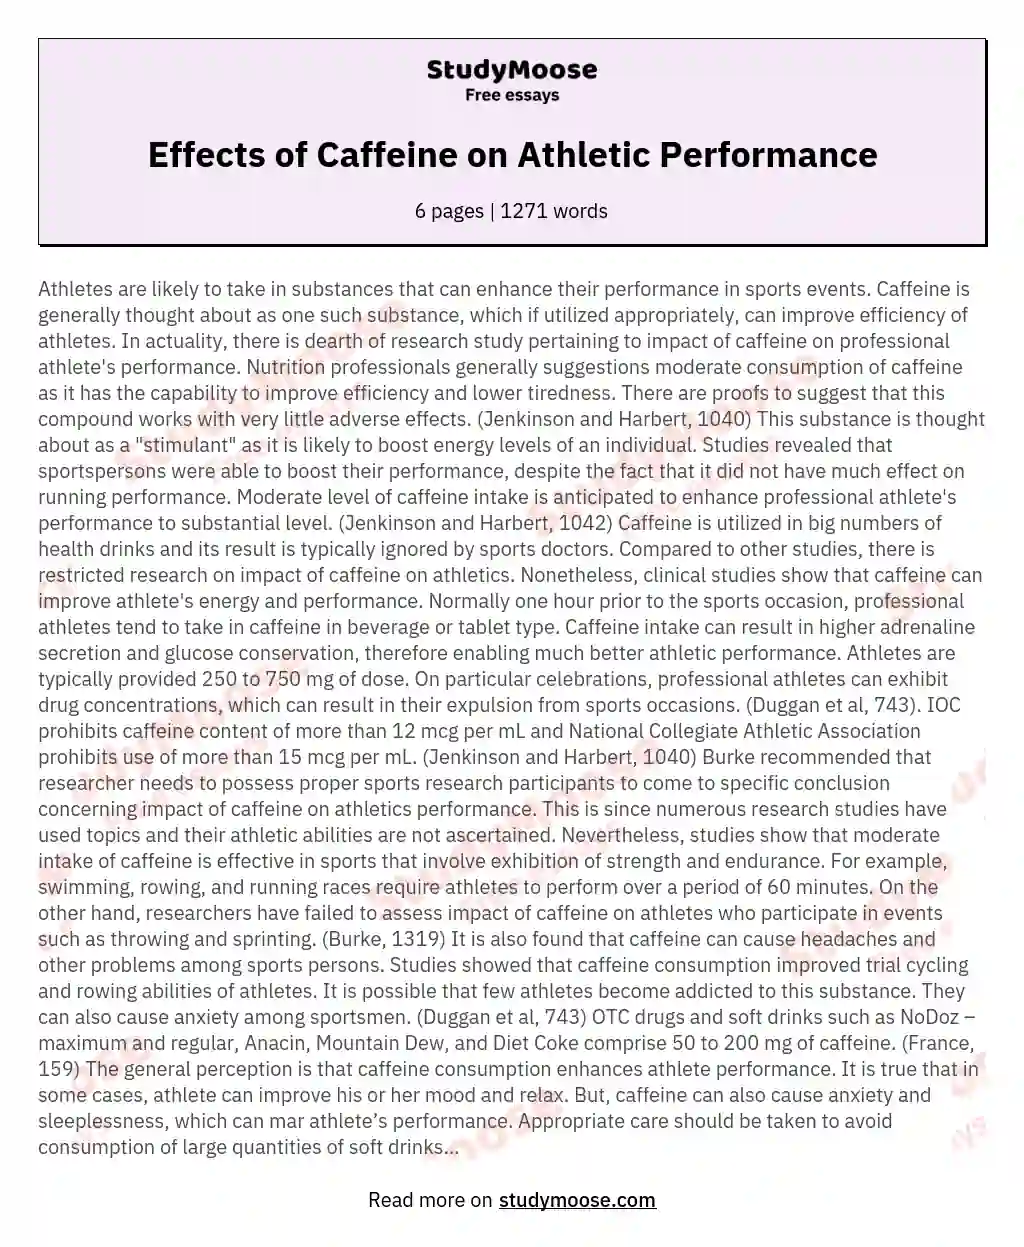 Effects of Caffeine on Athletic Performance essay